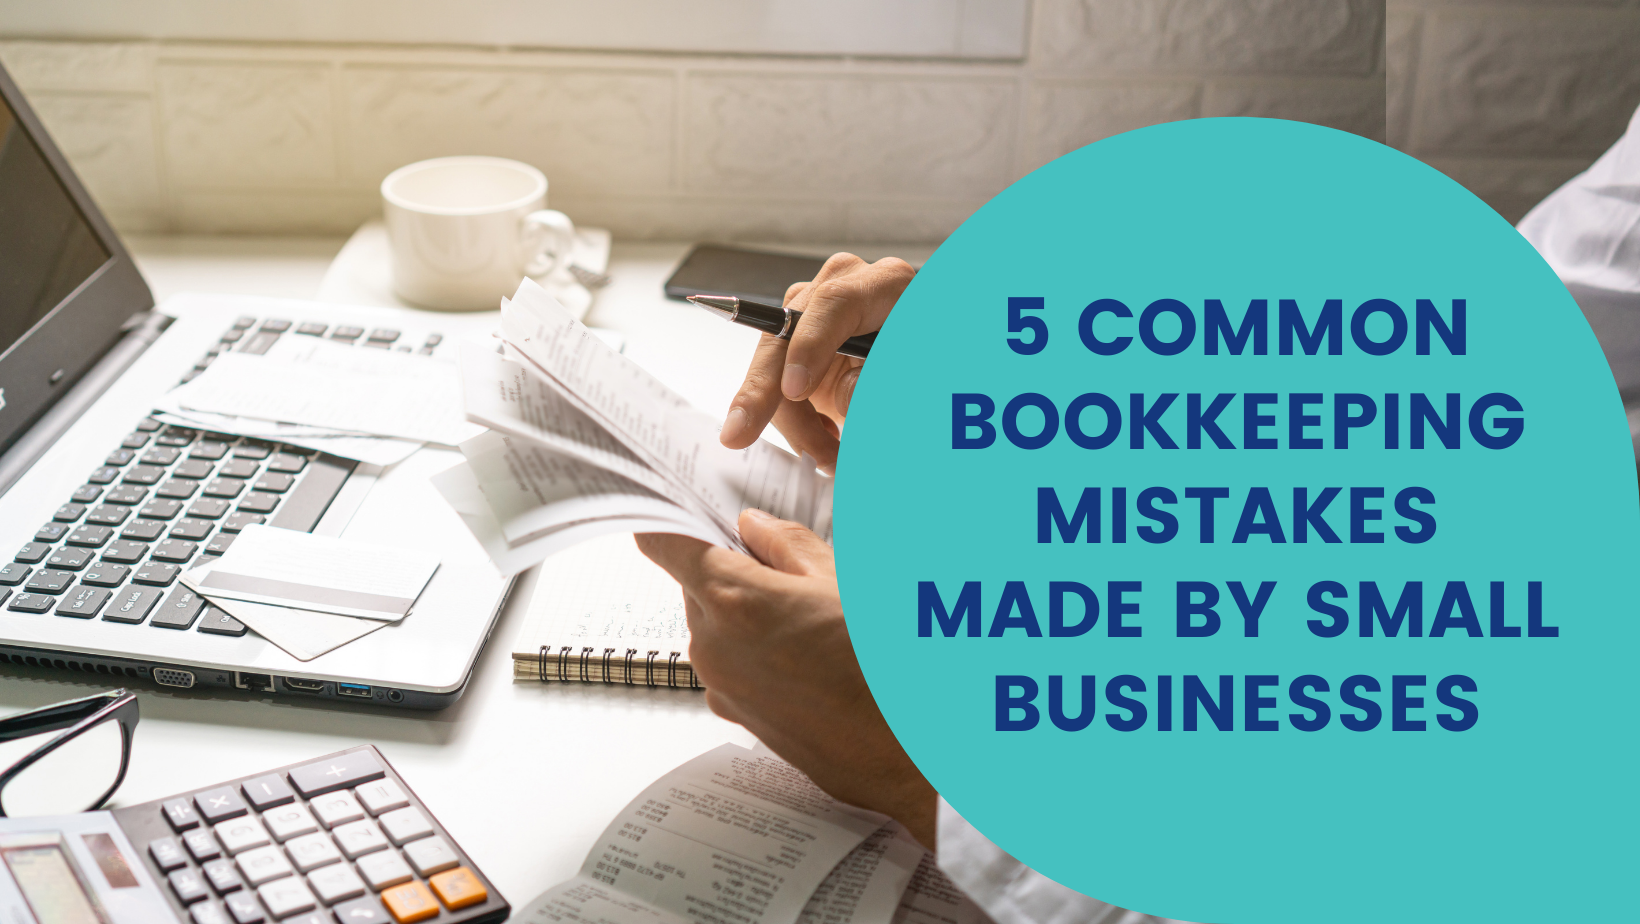 5 Common Bookkeeping Mistakes Made By Small Businesses